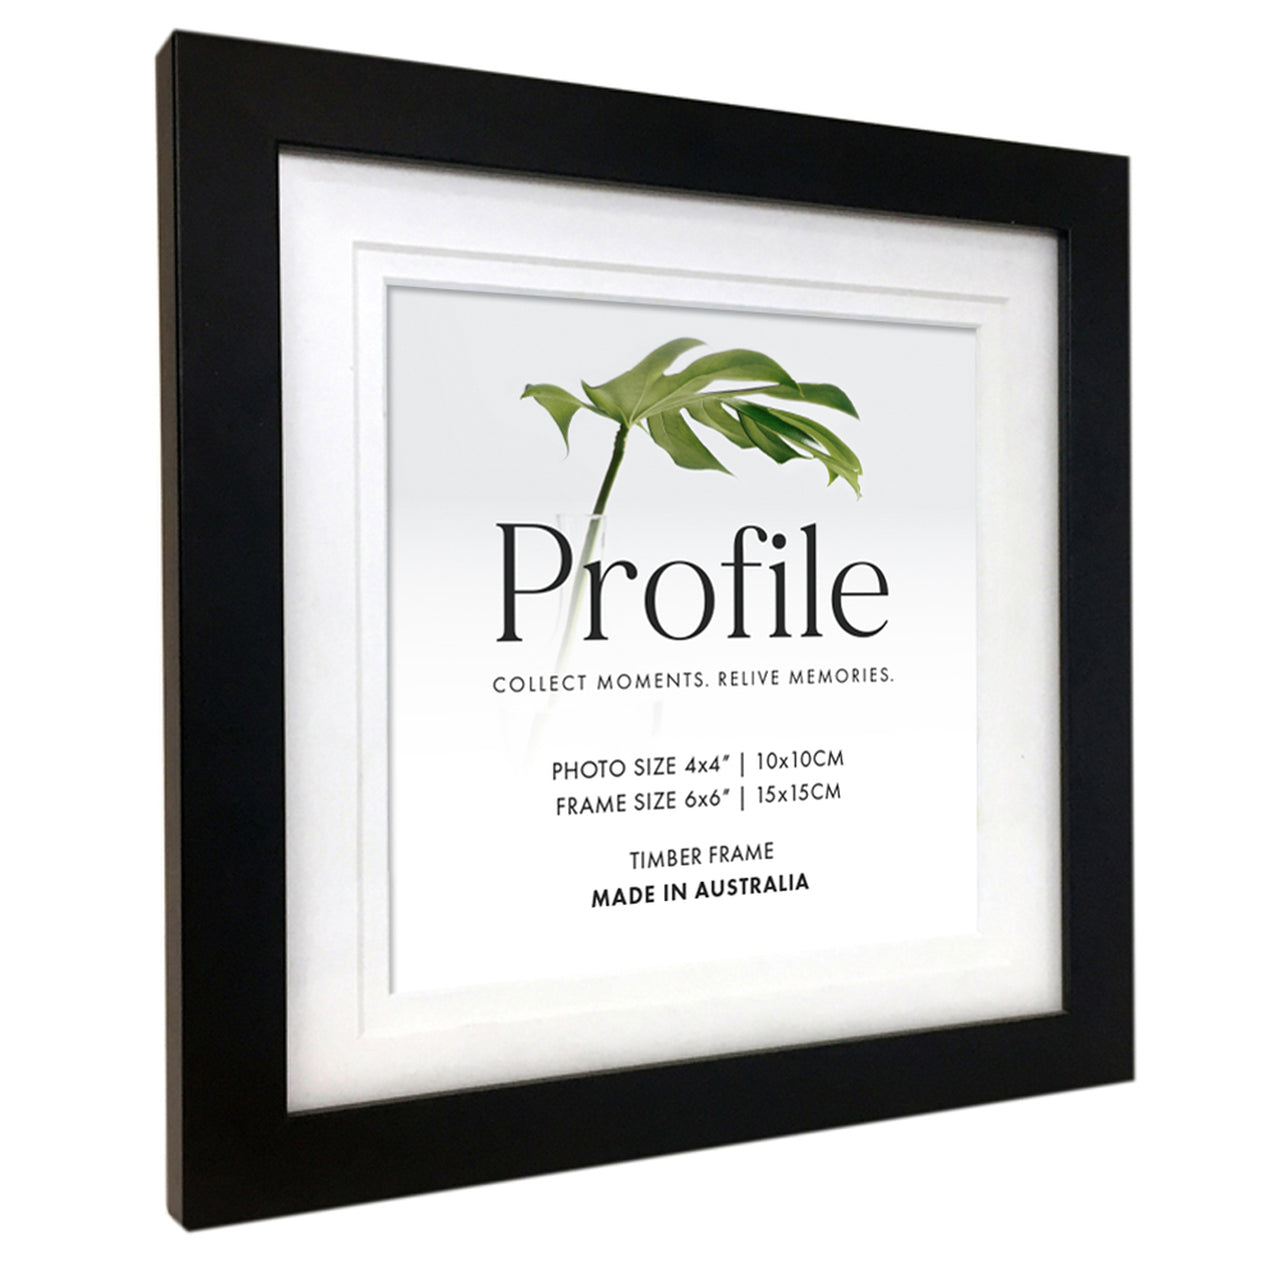 Deluxe Black 6x6 Photo Frame with 3x3 opening